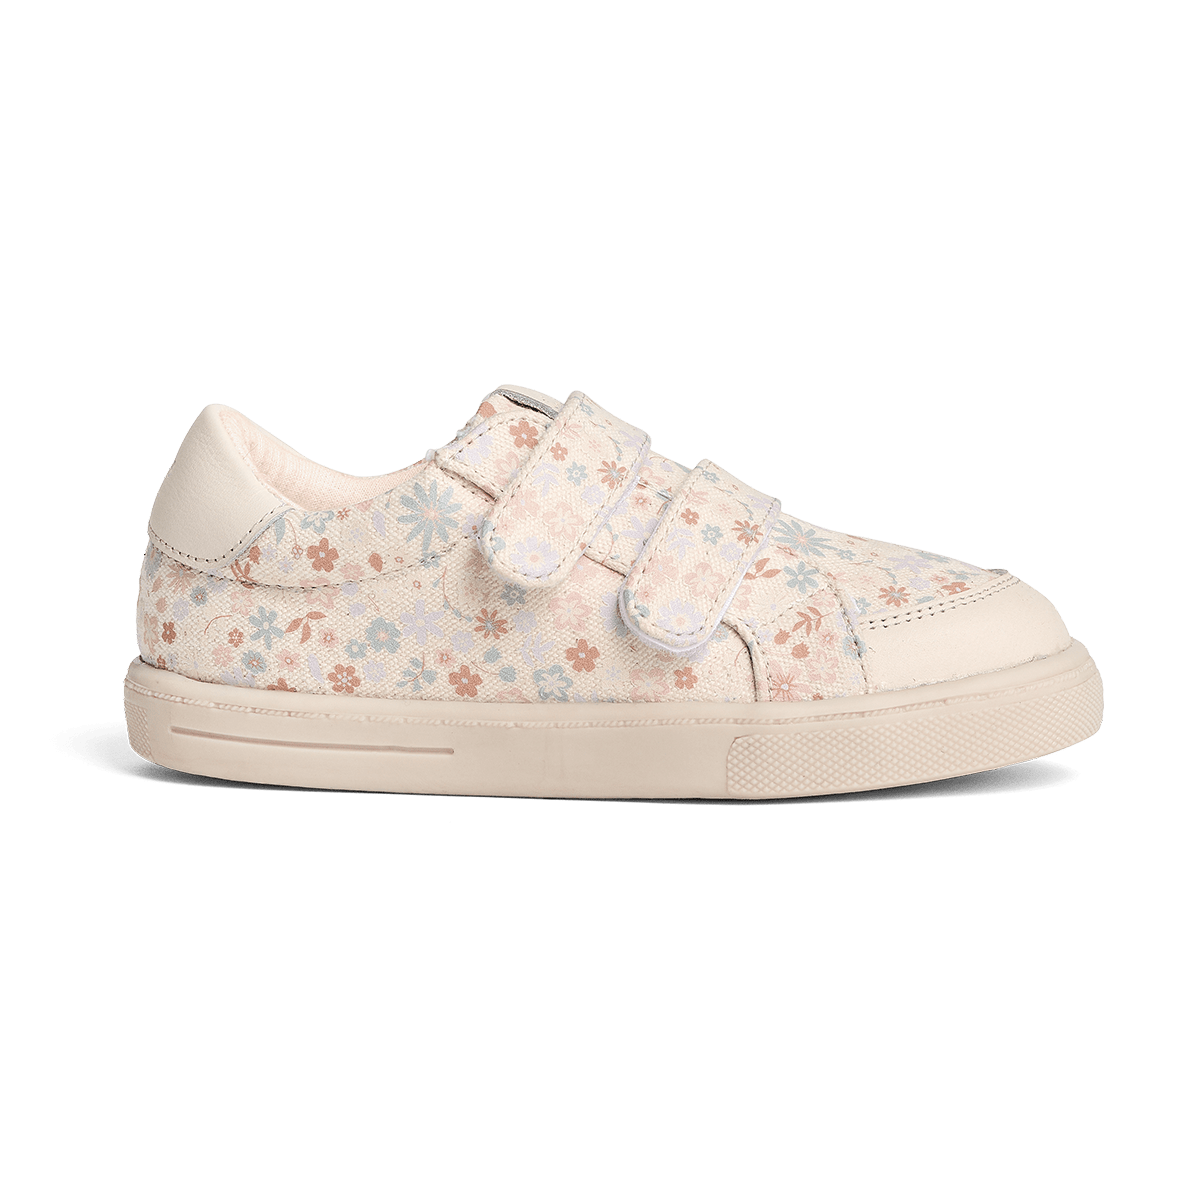 Pretty Brave Girls Shoes Otto Organic Canvas Sneaker in Botanical